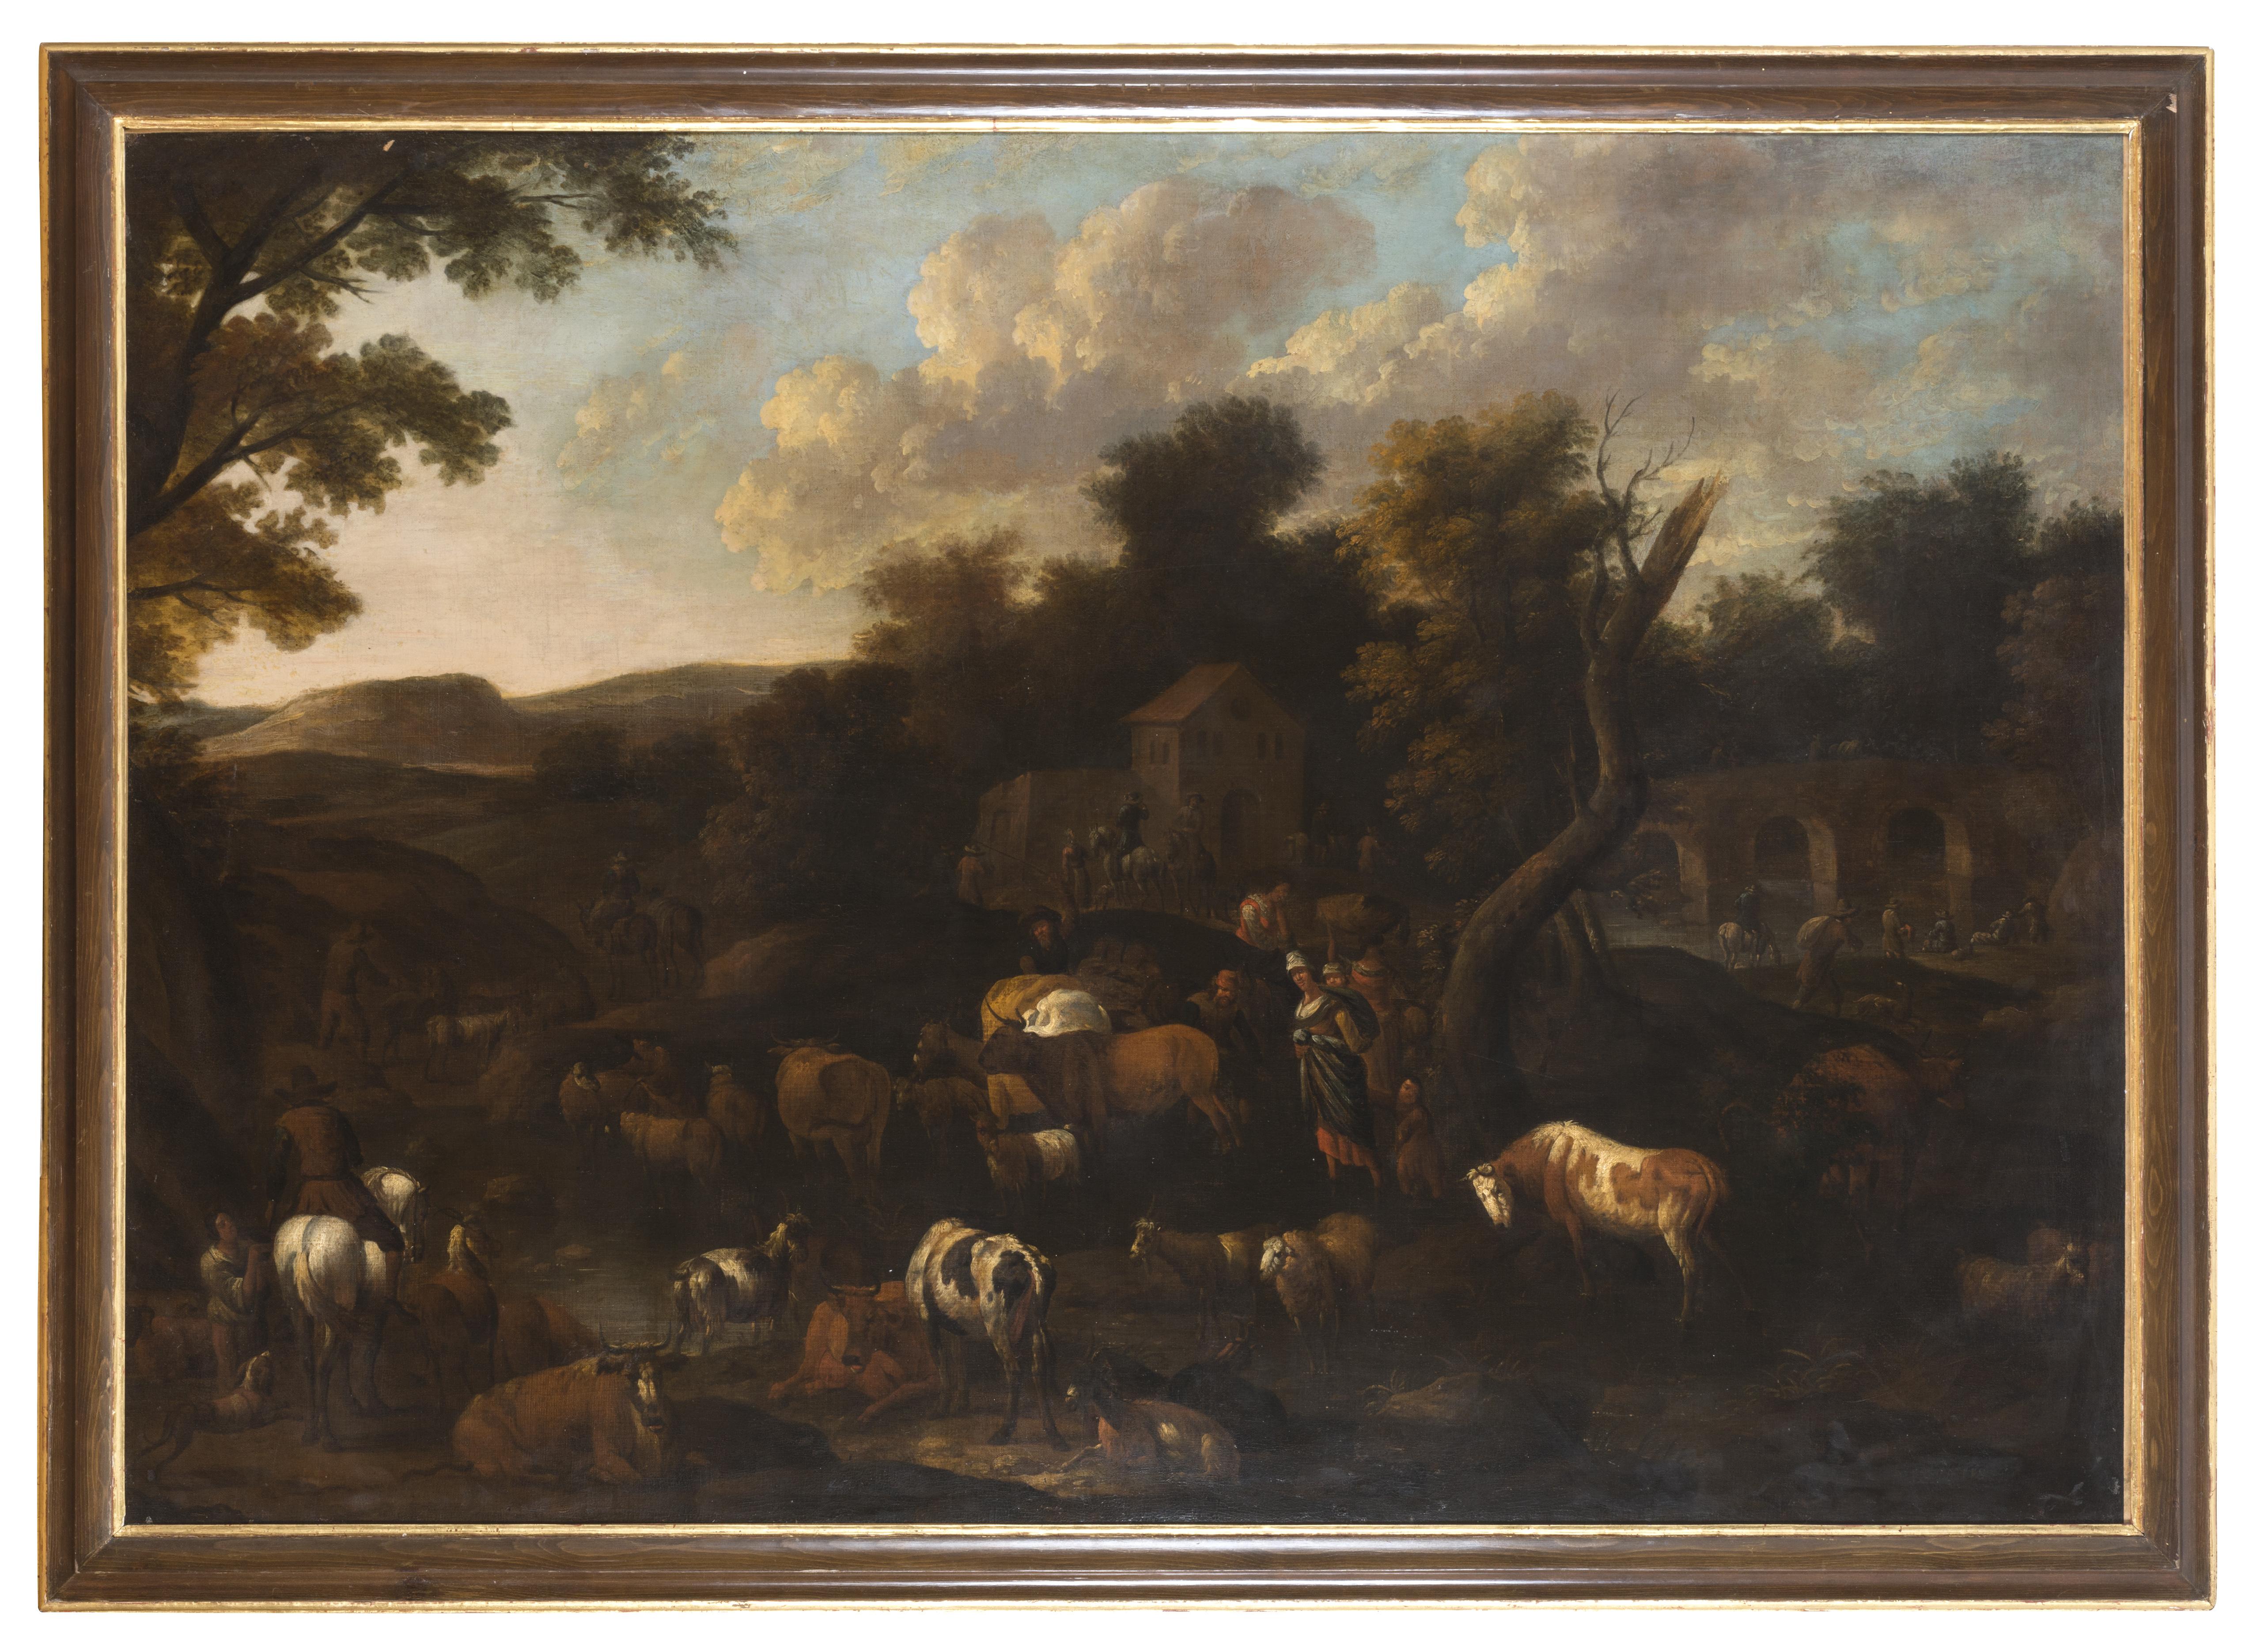 Unknown Figurative Painting - Landscape with Shepherds and Flocks - Oil on Canvas by Flemish Master - 1600